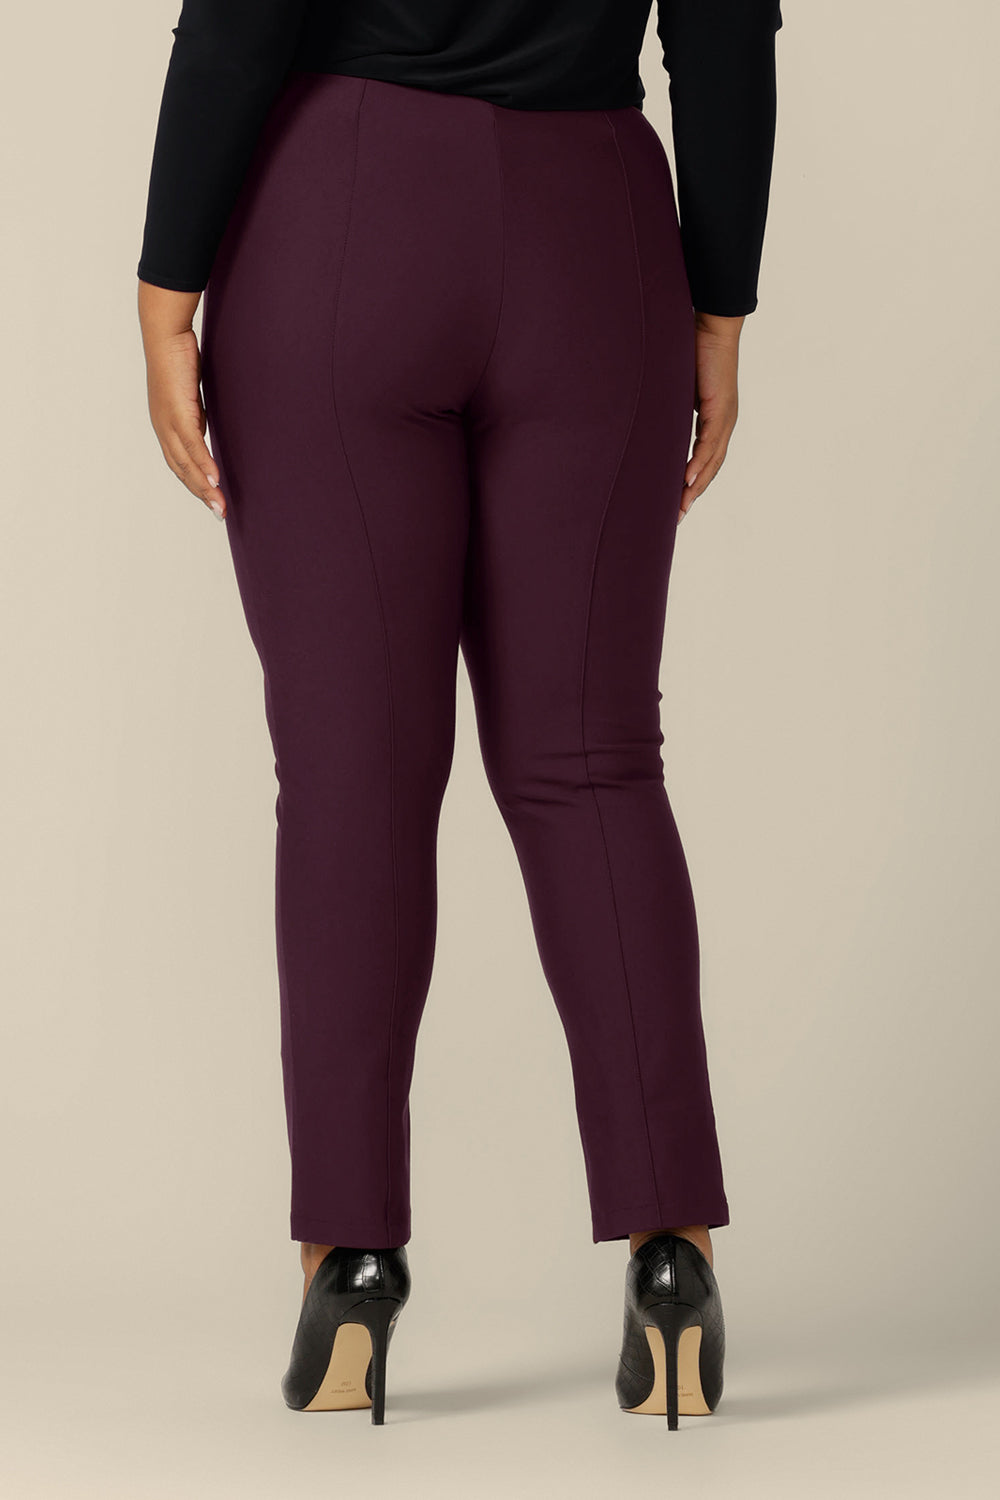 Diaz Pant in Mulberry – L&F Fashion Outlet